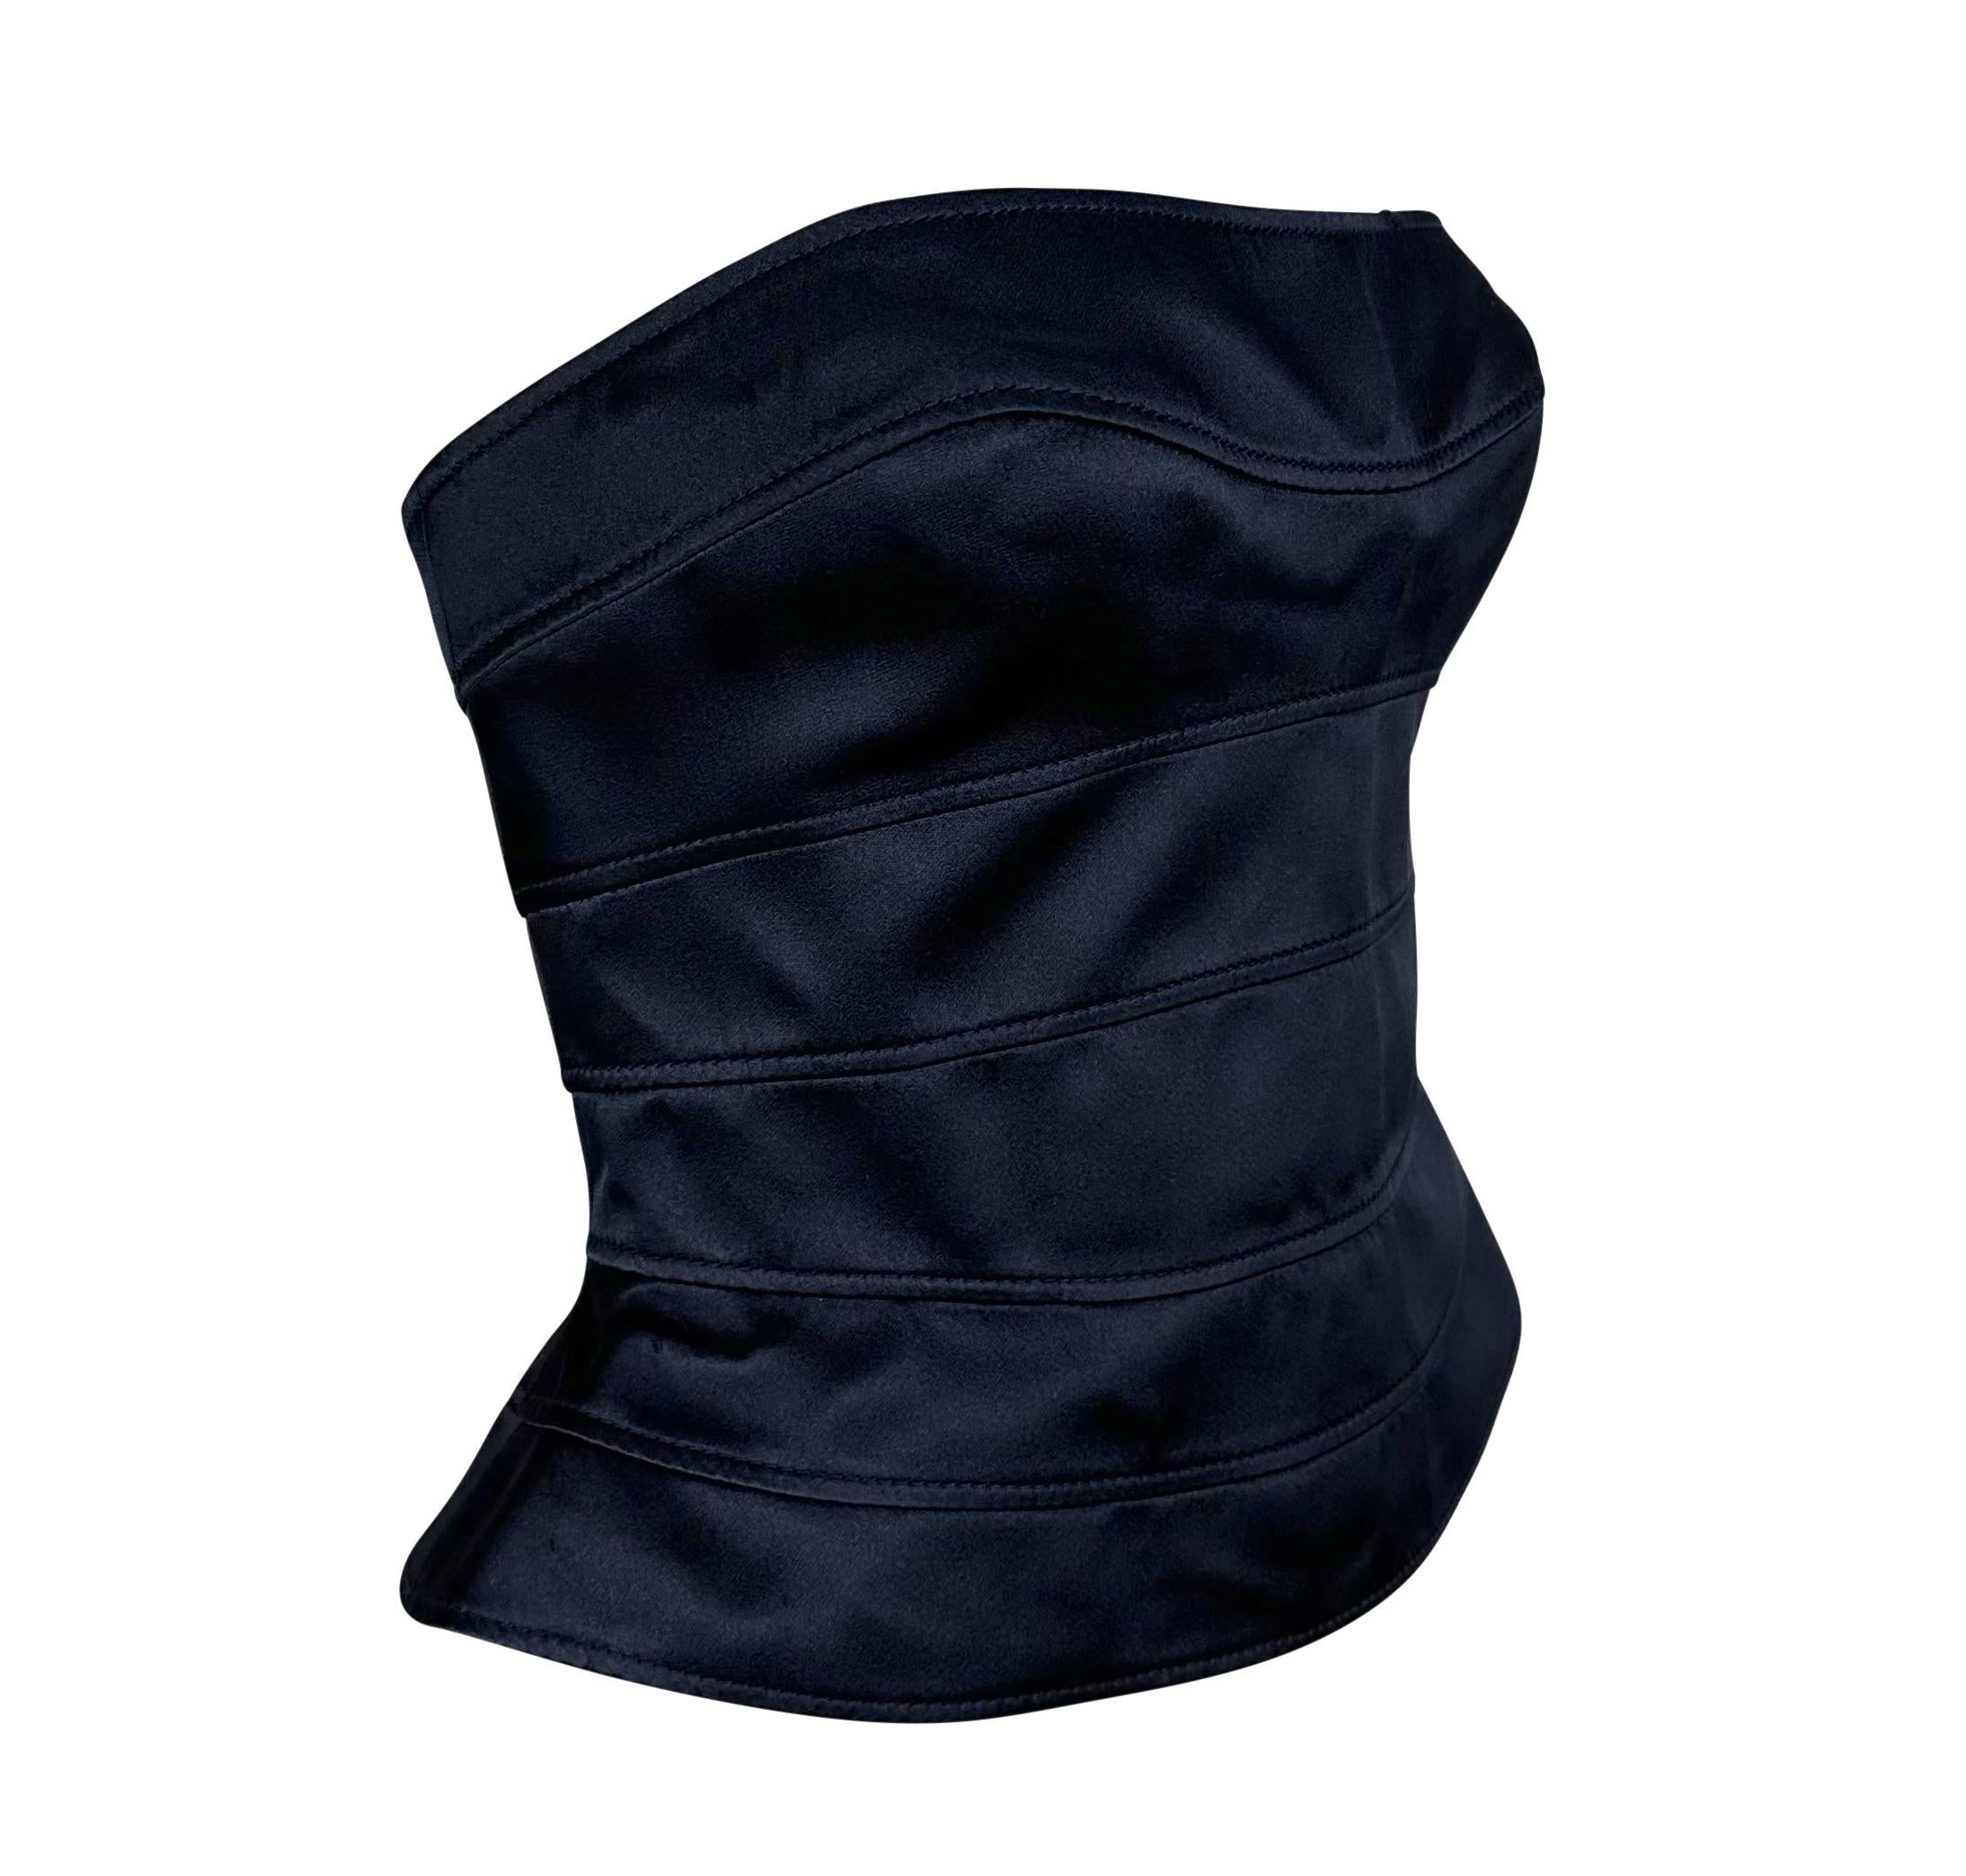 Black 1990s Thierry Mugler Navy Satin Paneled Strapless Bustier Silk Corset Top For Sale